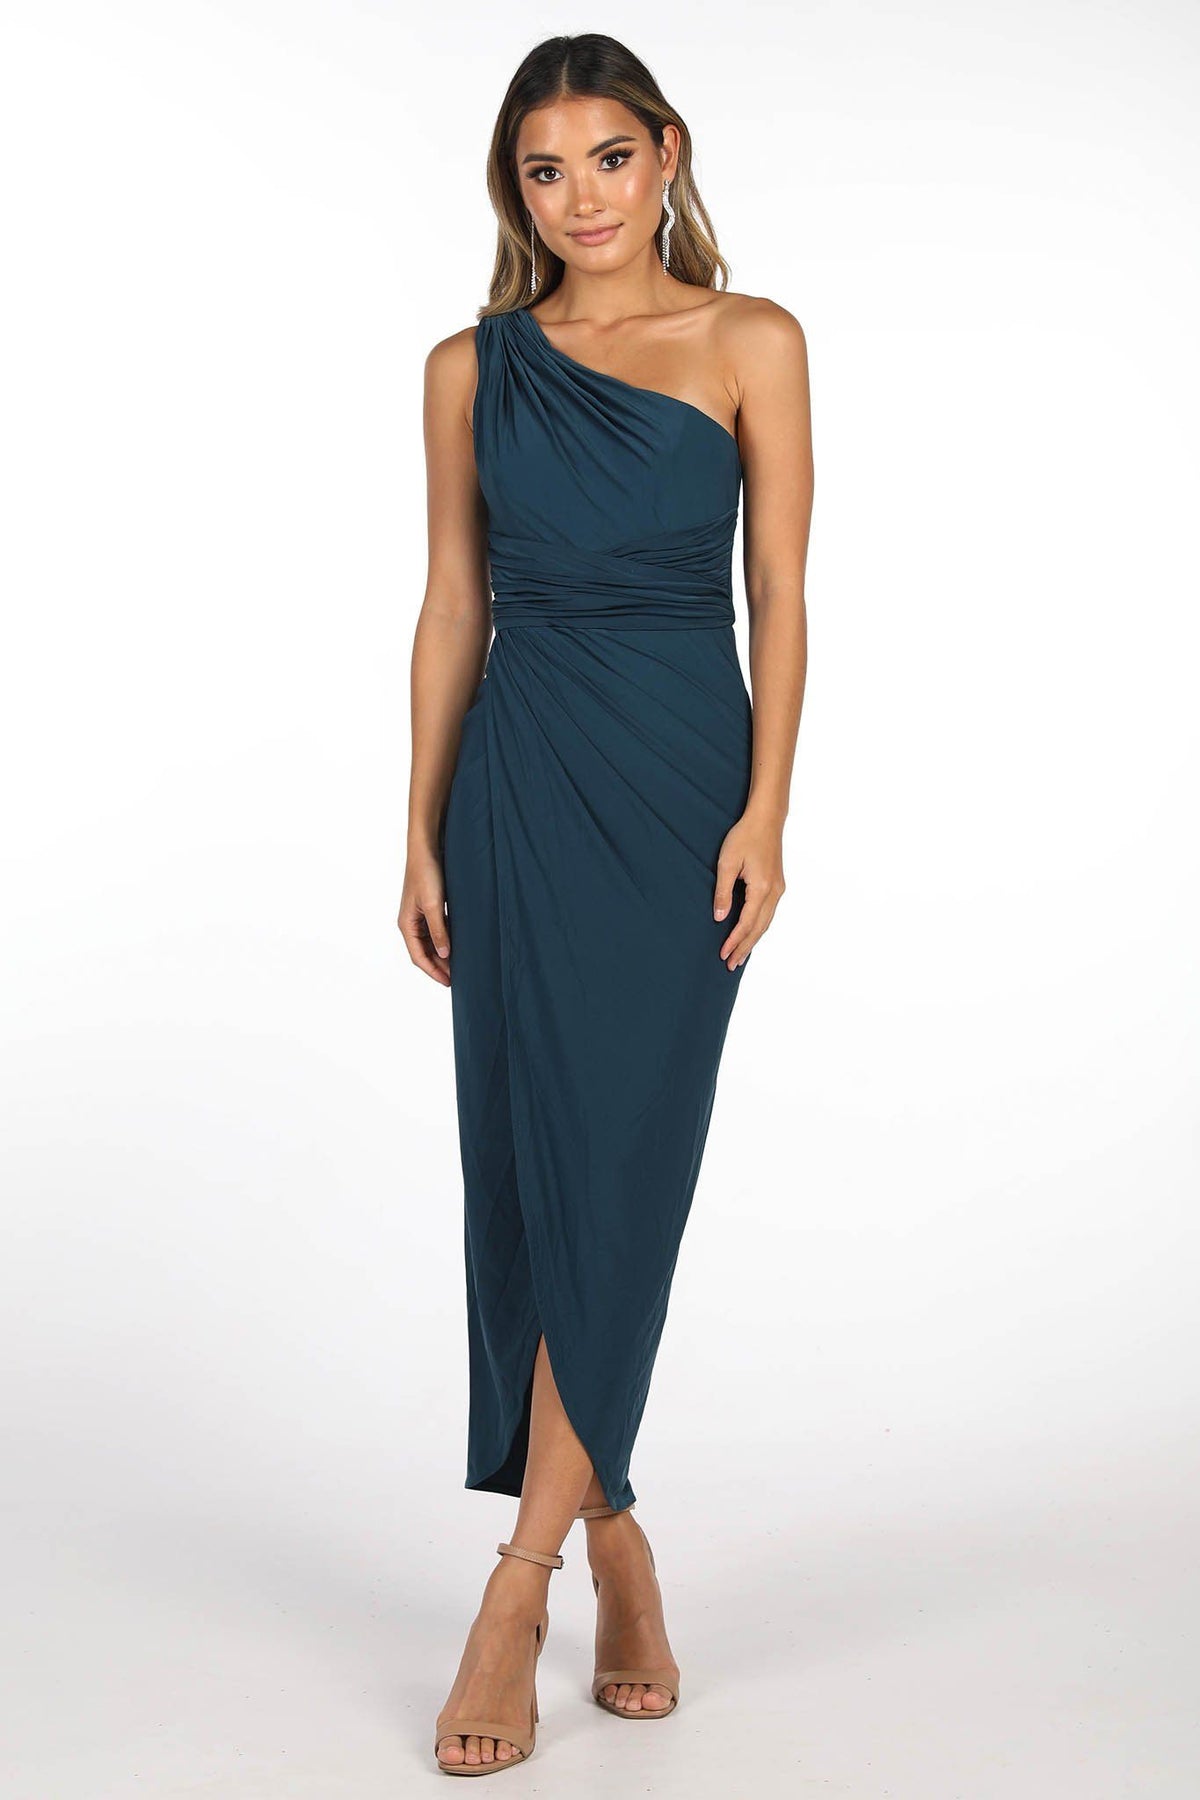 Deep Teal Green Midi Dress with One Shoulder Neckline, Faux-wrap Front Design and Asymmetrical Skirt with Centre Front Split